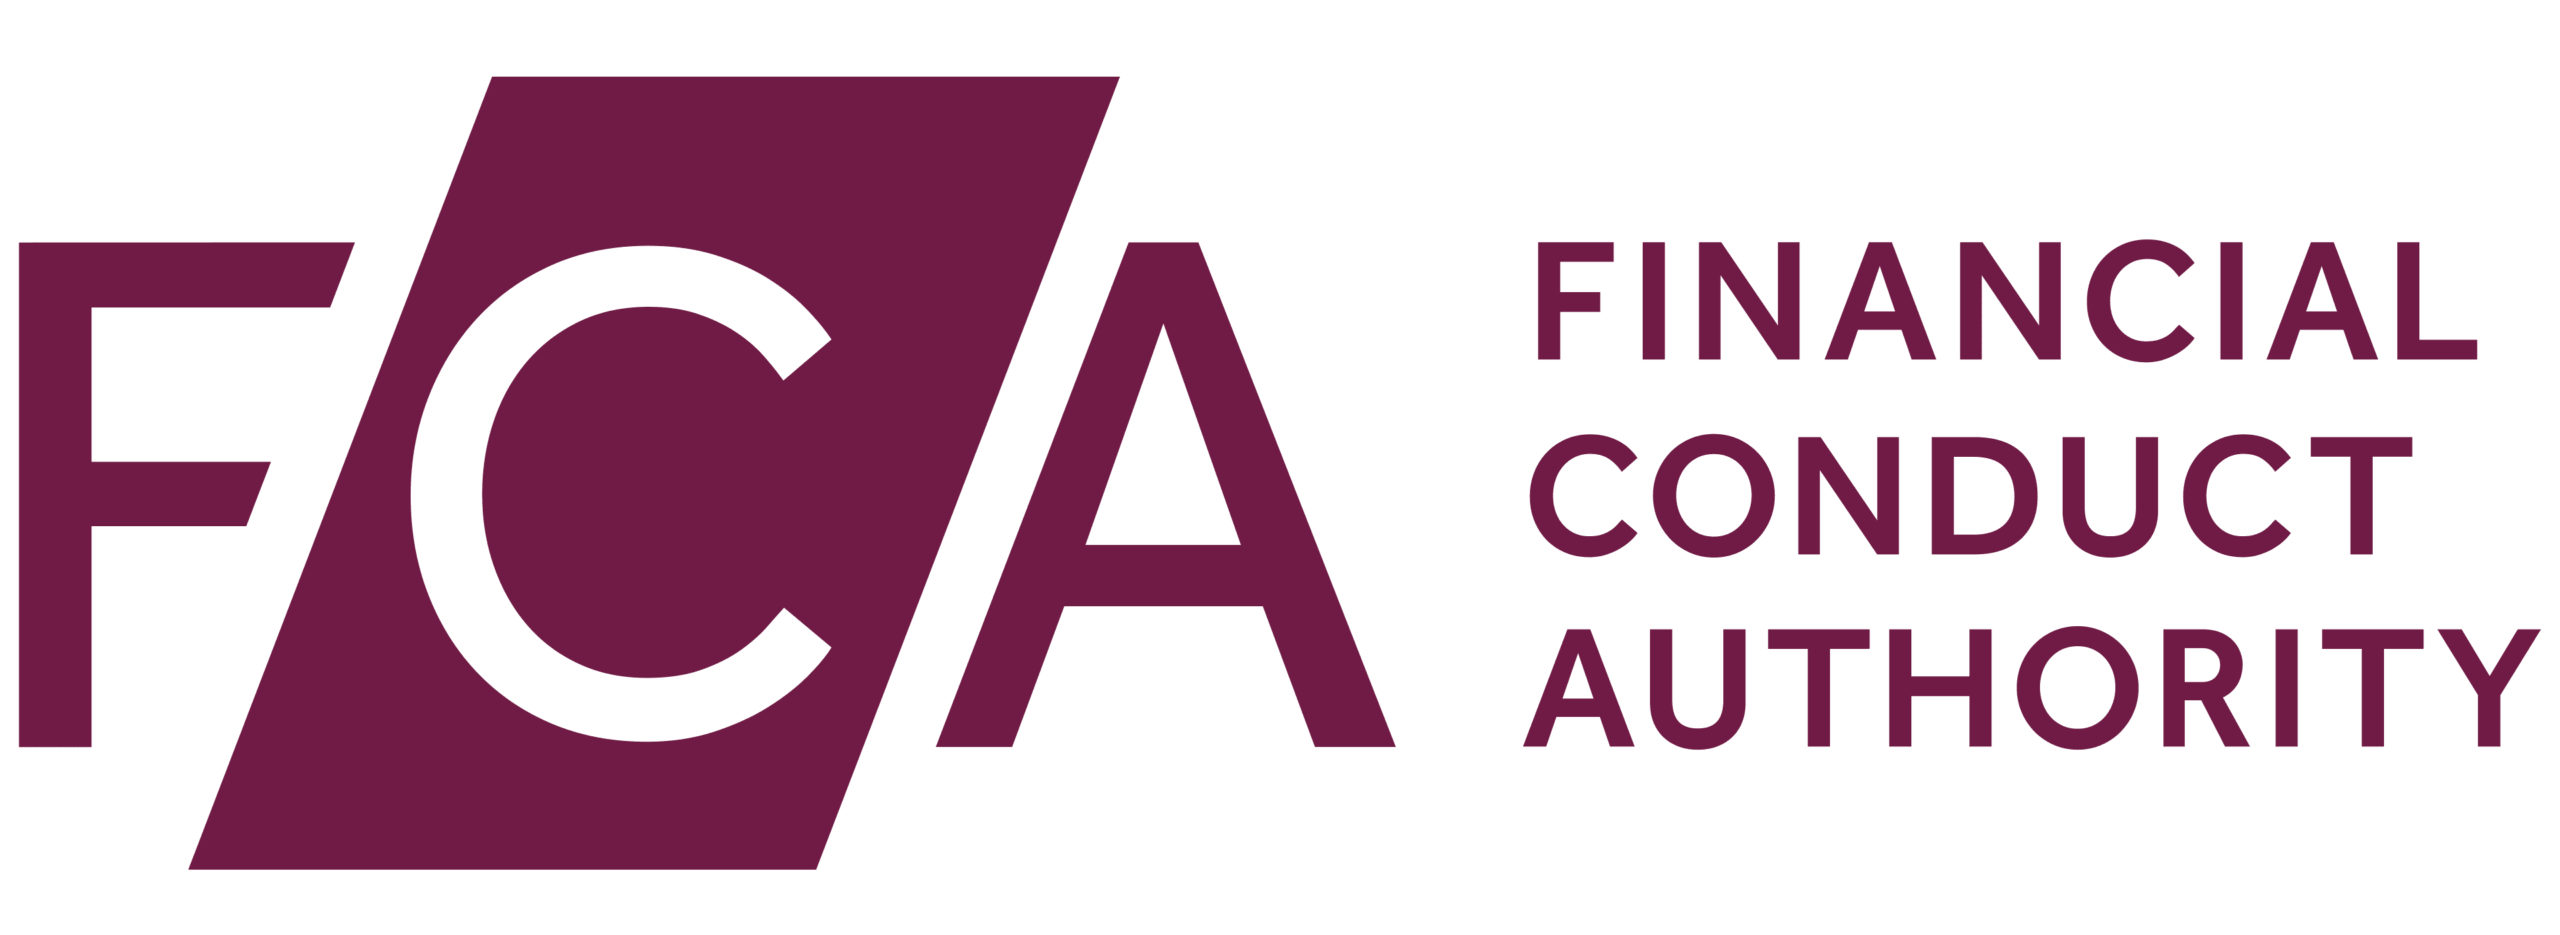 Financial-Conduct-Authority-Logo